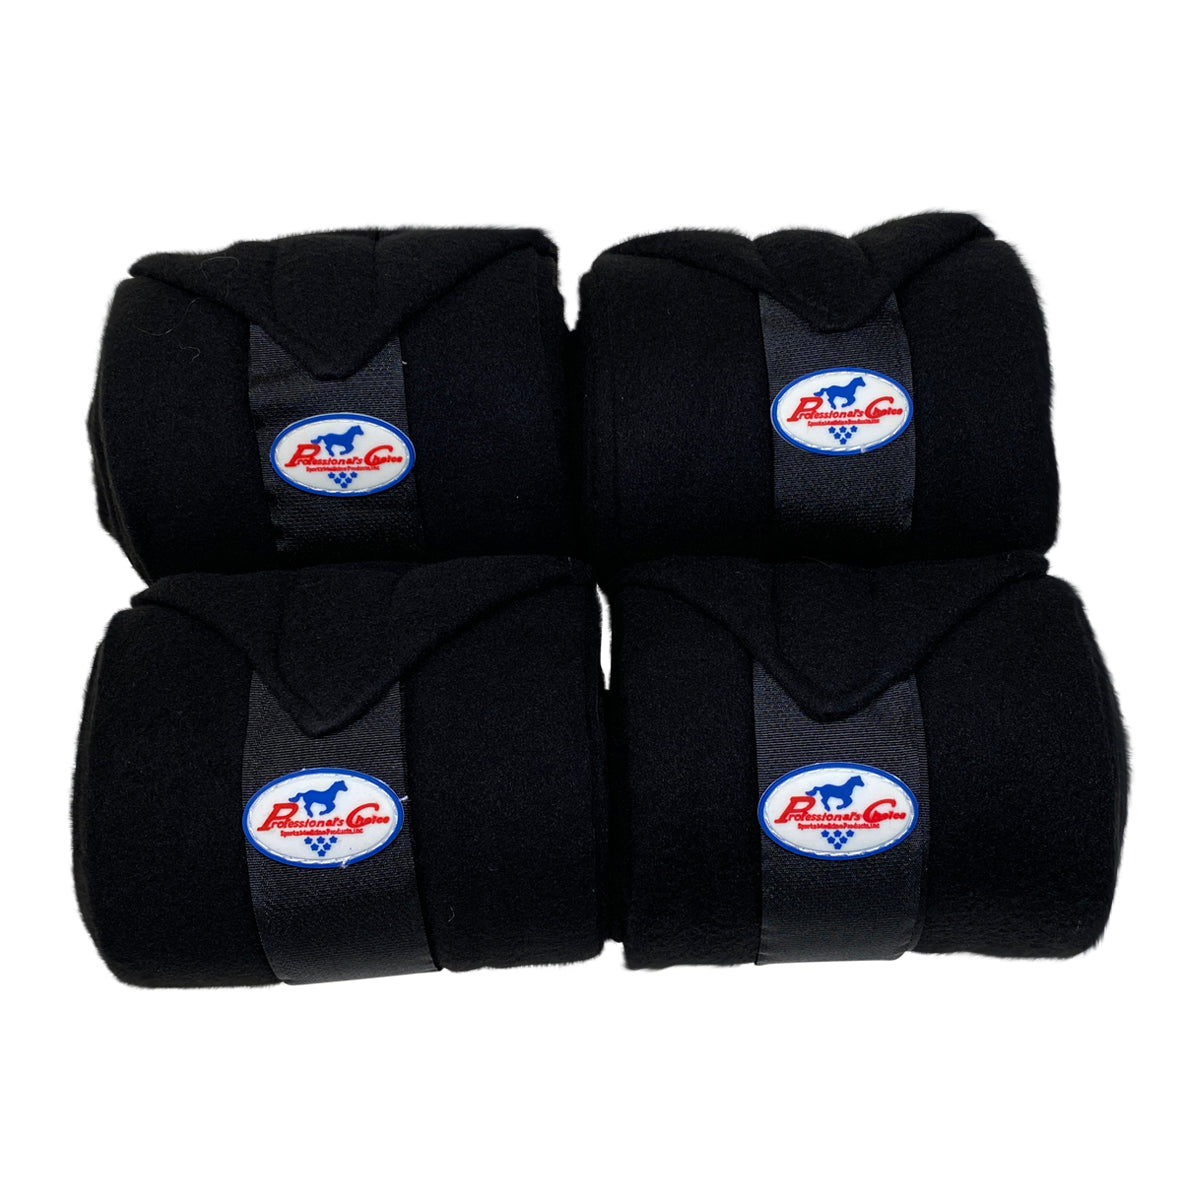 Professional's Choice Combo Bandages in Black Set of 4 in Black